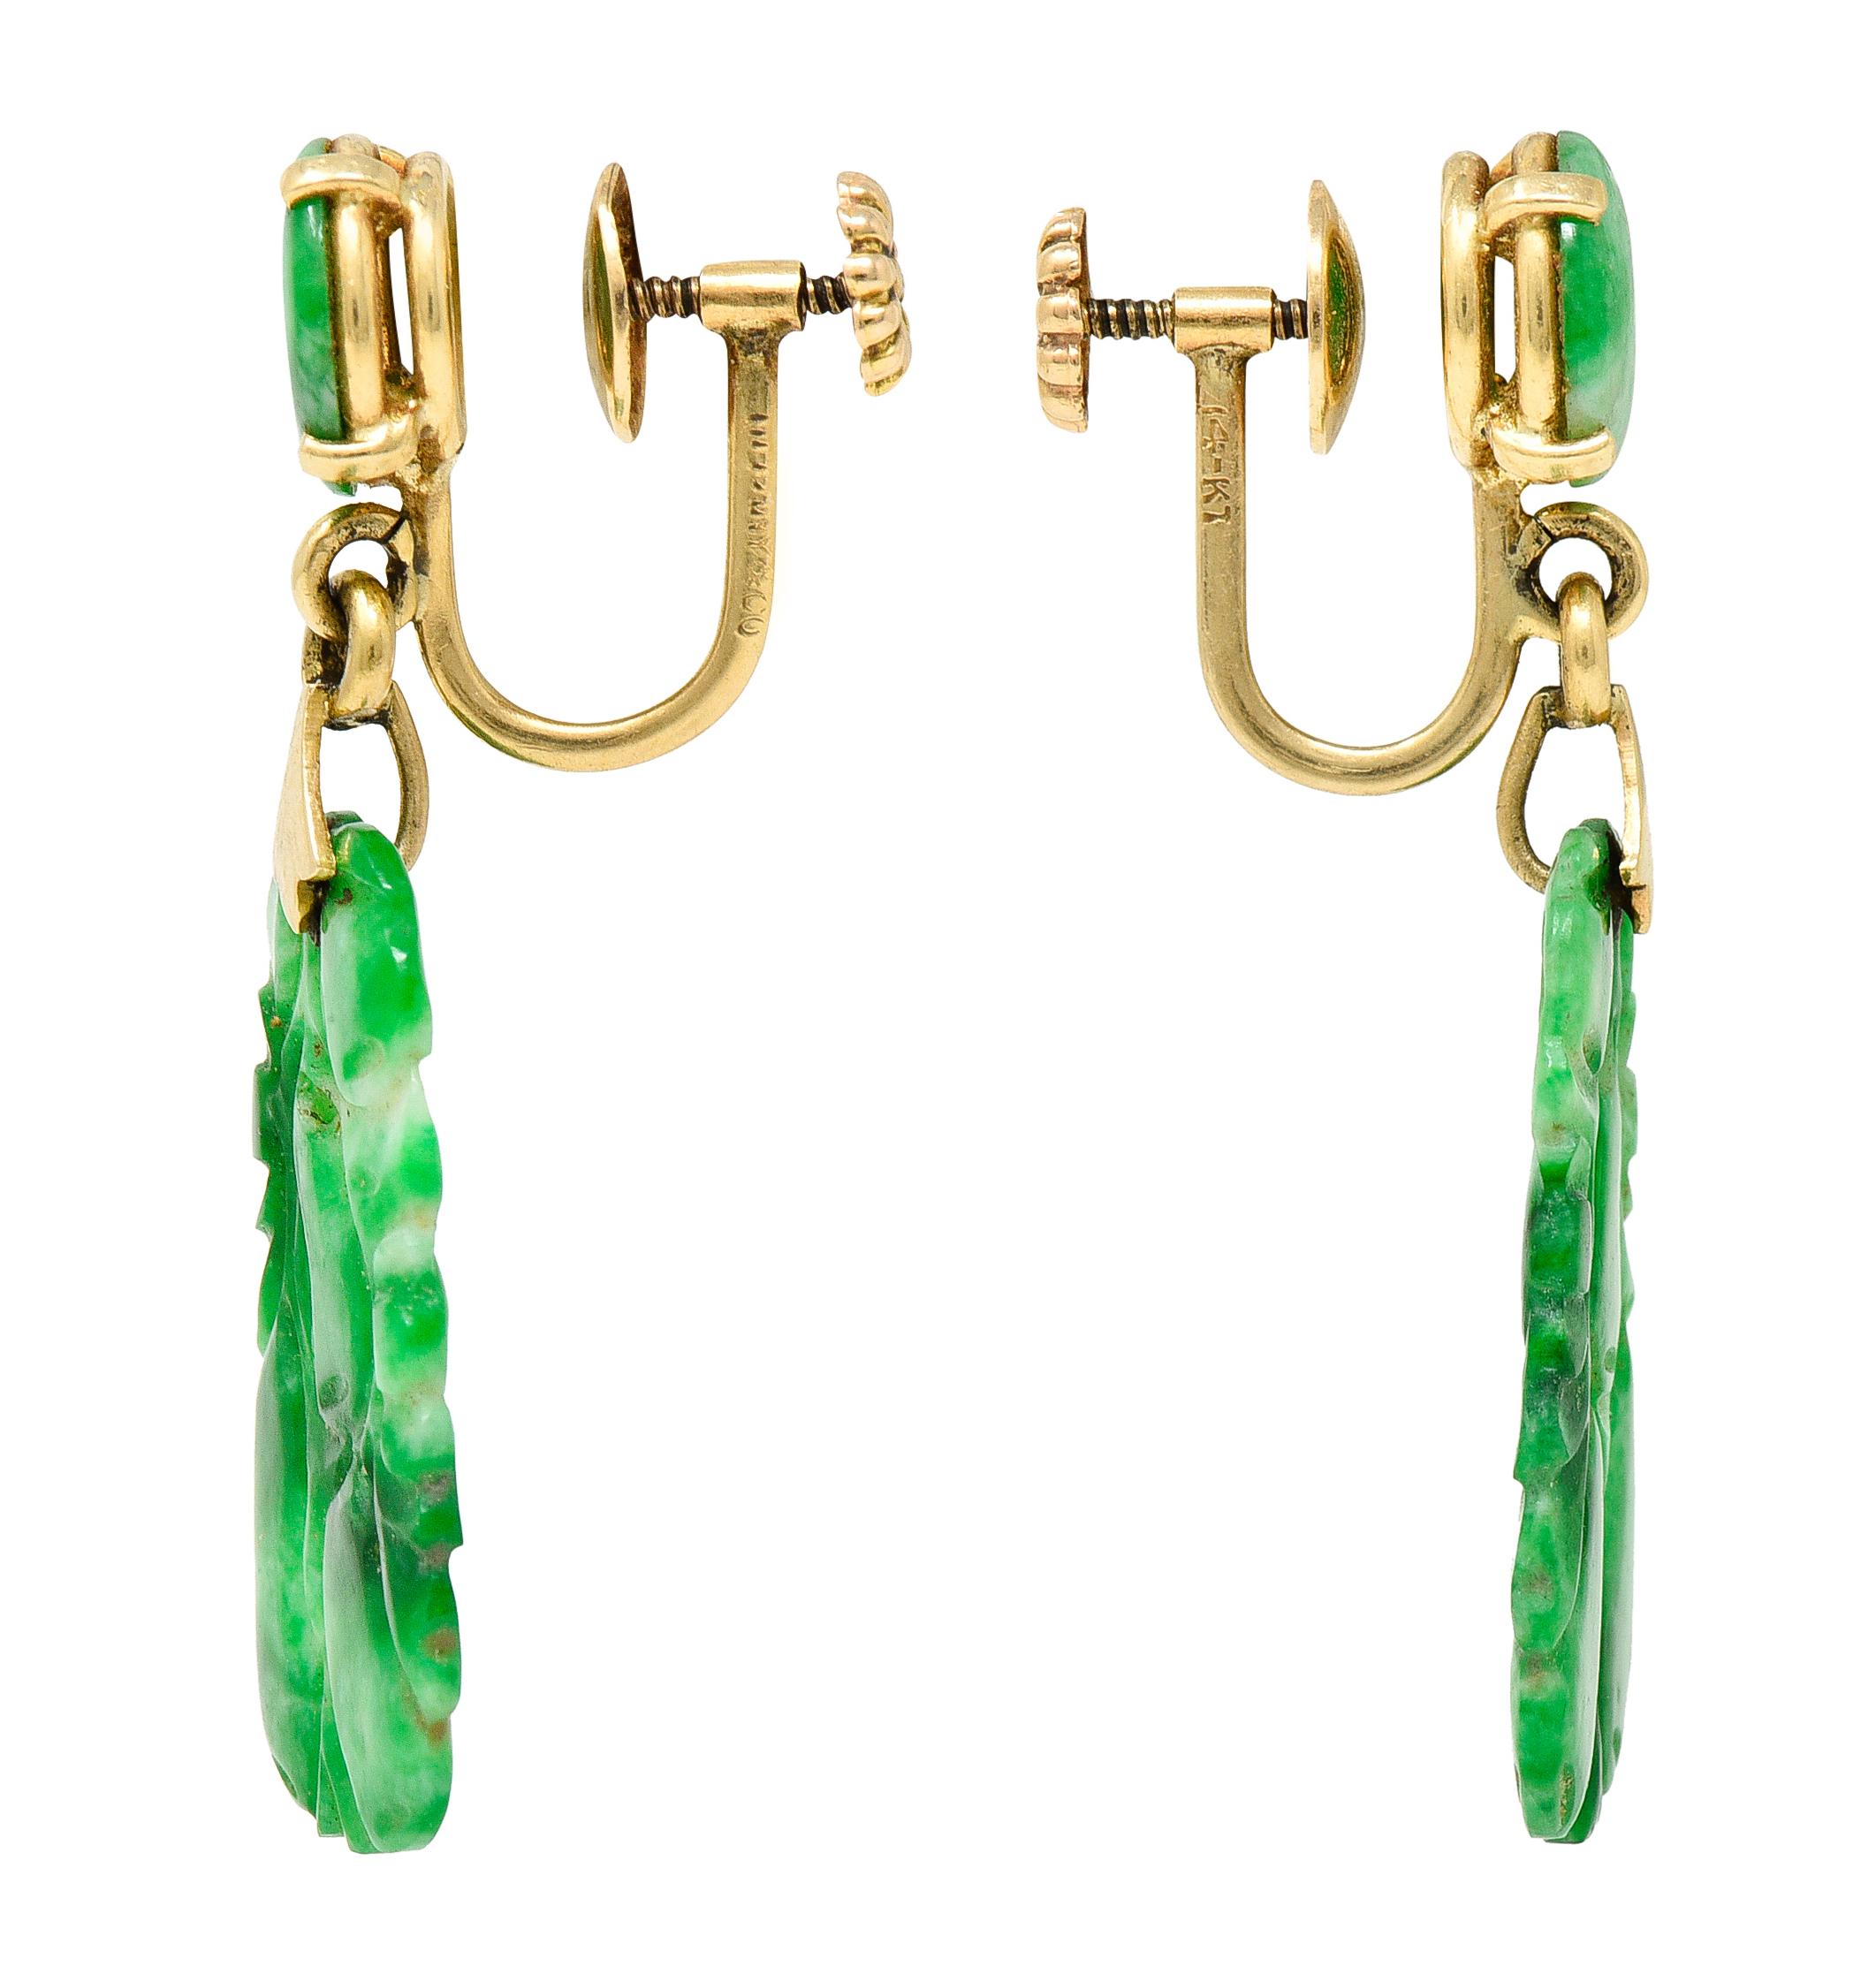 Screwback earrings surmount is a basket set 8.3 mm jade cabochon button. Suspending an articulated tablet jade drop with a stylized yellow gold foliate bale. Drop is carved to depict fruit nested in tree branches. Overall jade is opaque with strong